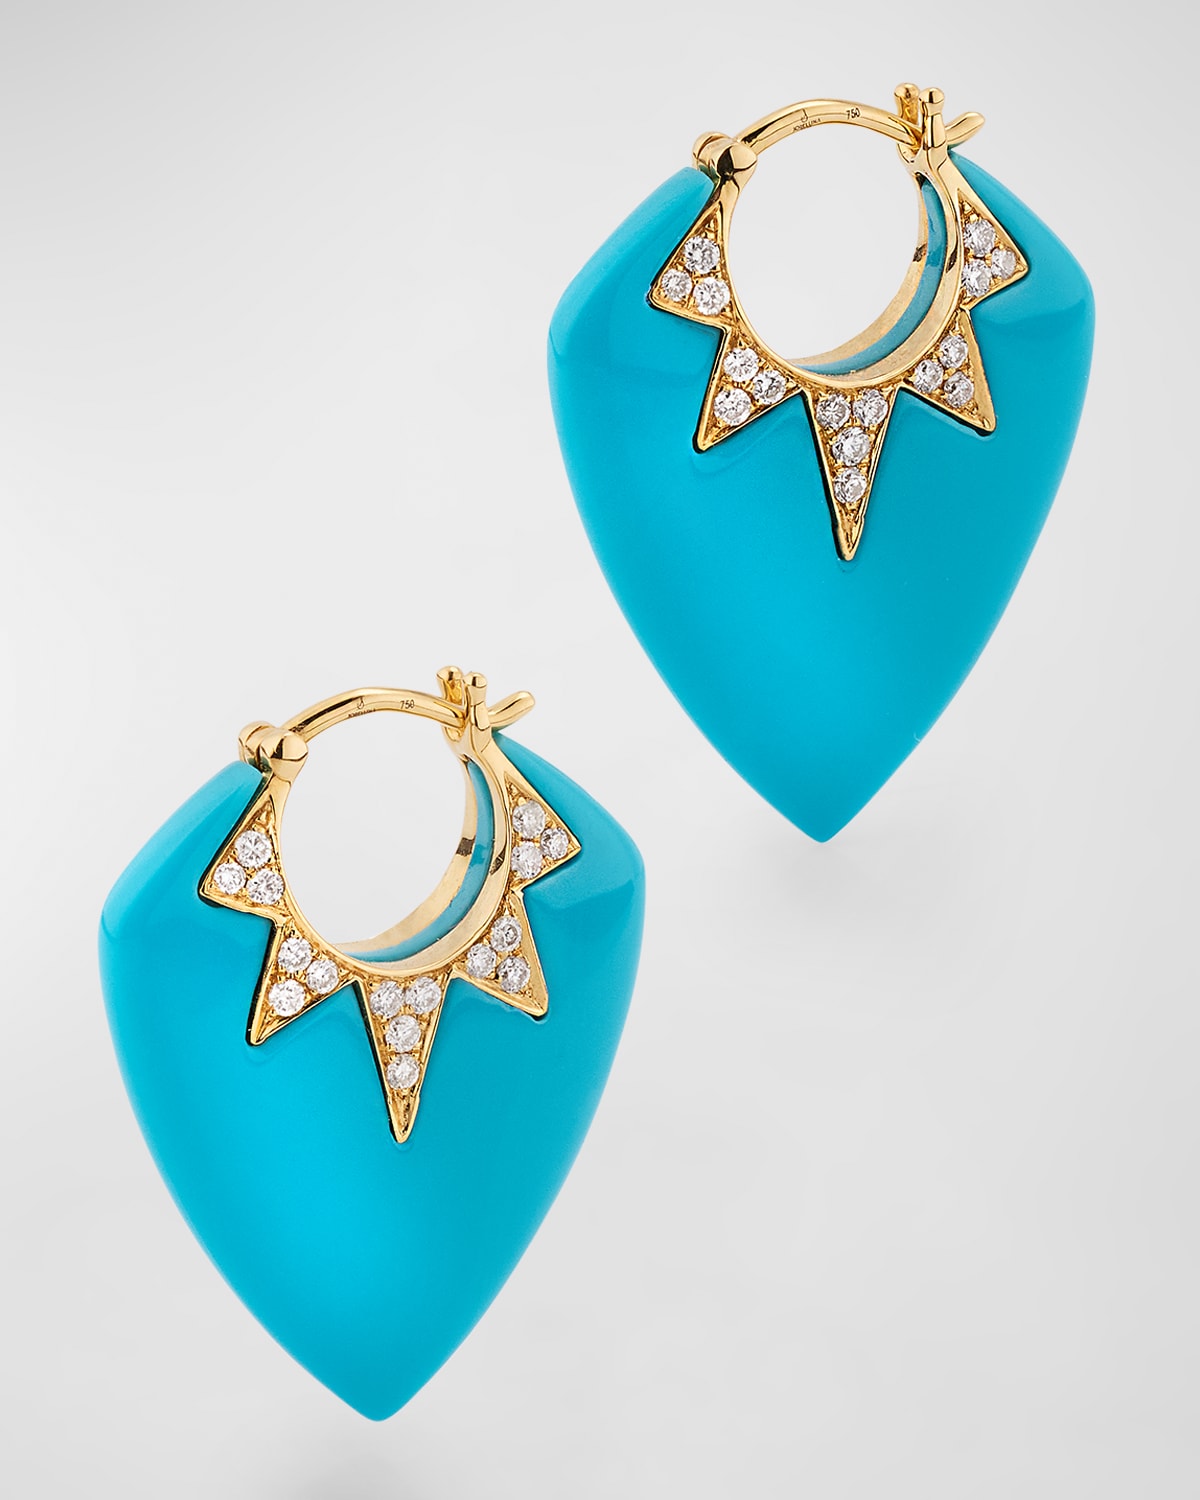 18K Yellow Gold Earrings with Turquoise and GH-SI Diamonds. 25x20mm